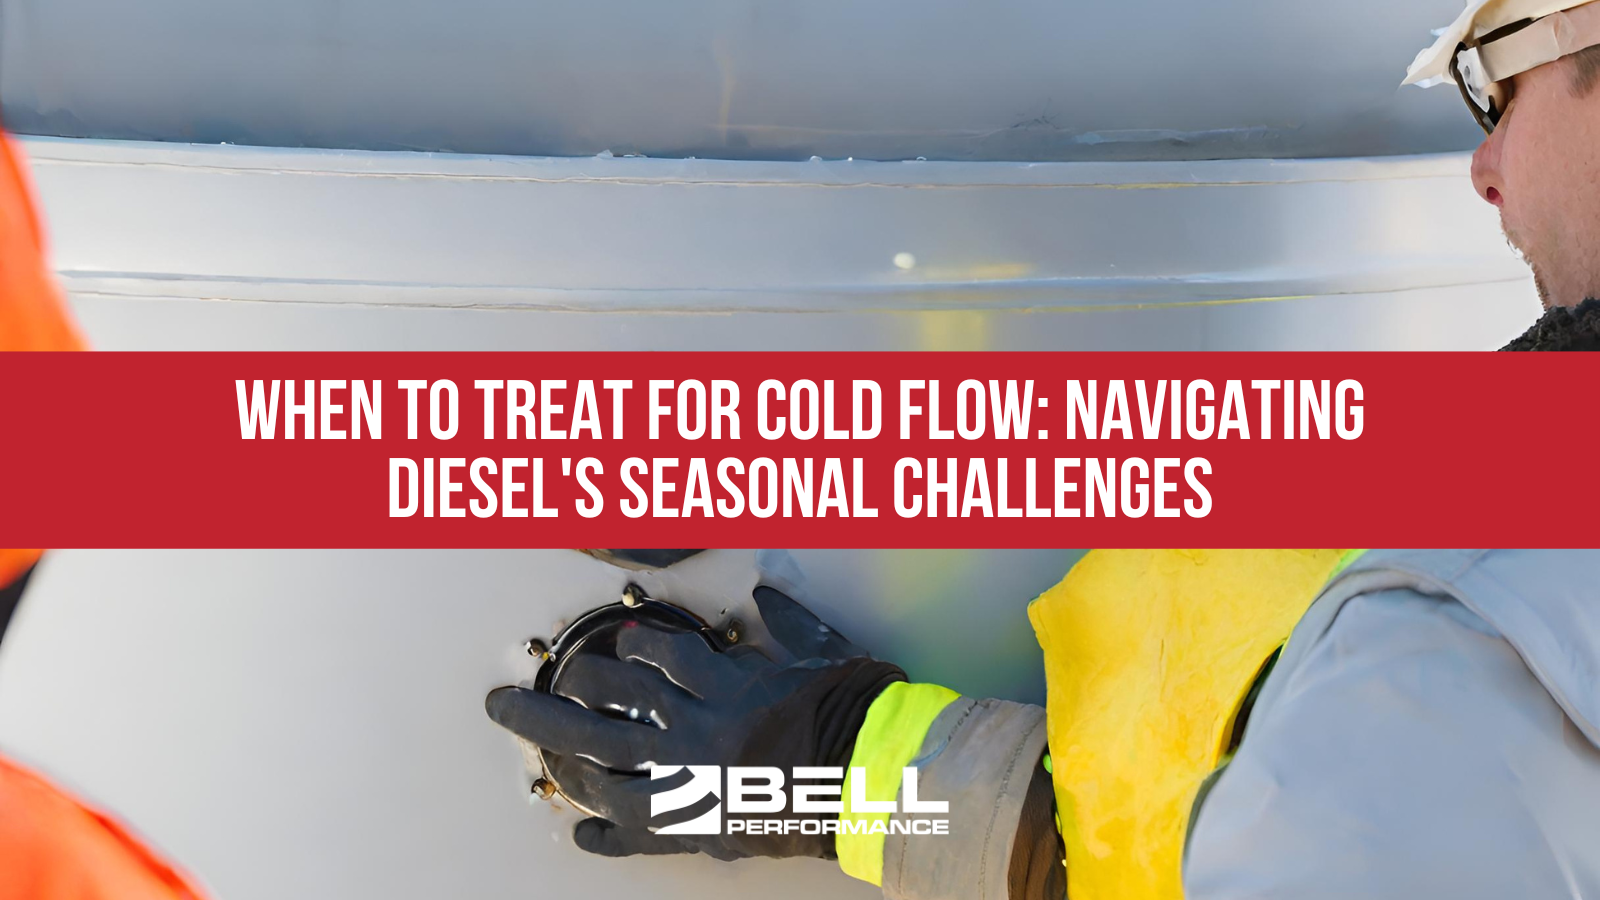 When To Treat For Cold Flow: Navigating Diesel's Seasonal Challenges